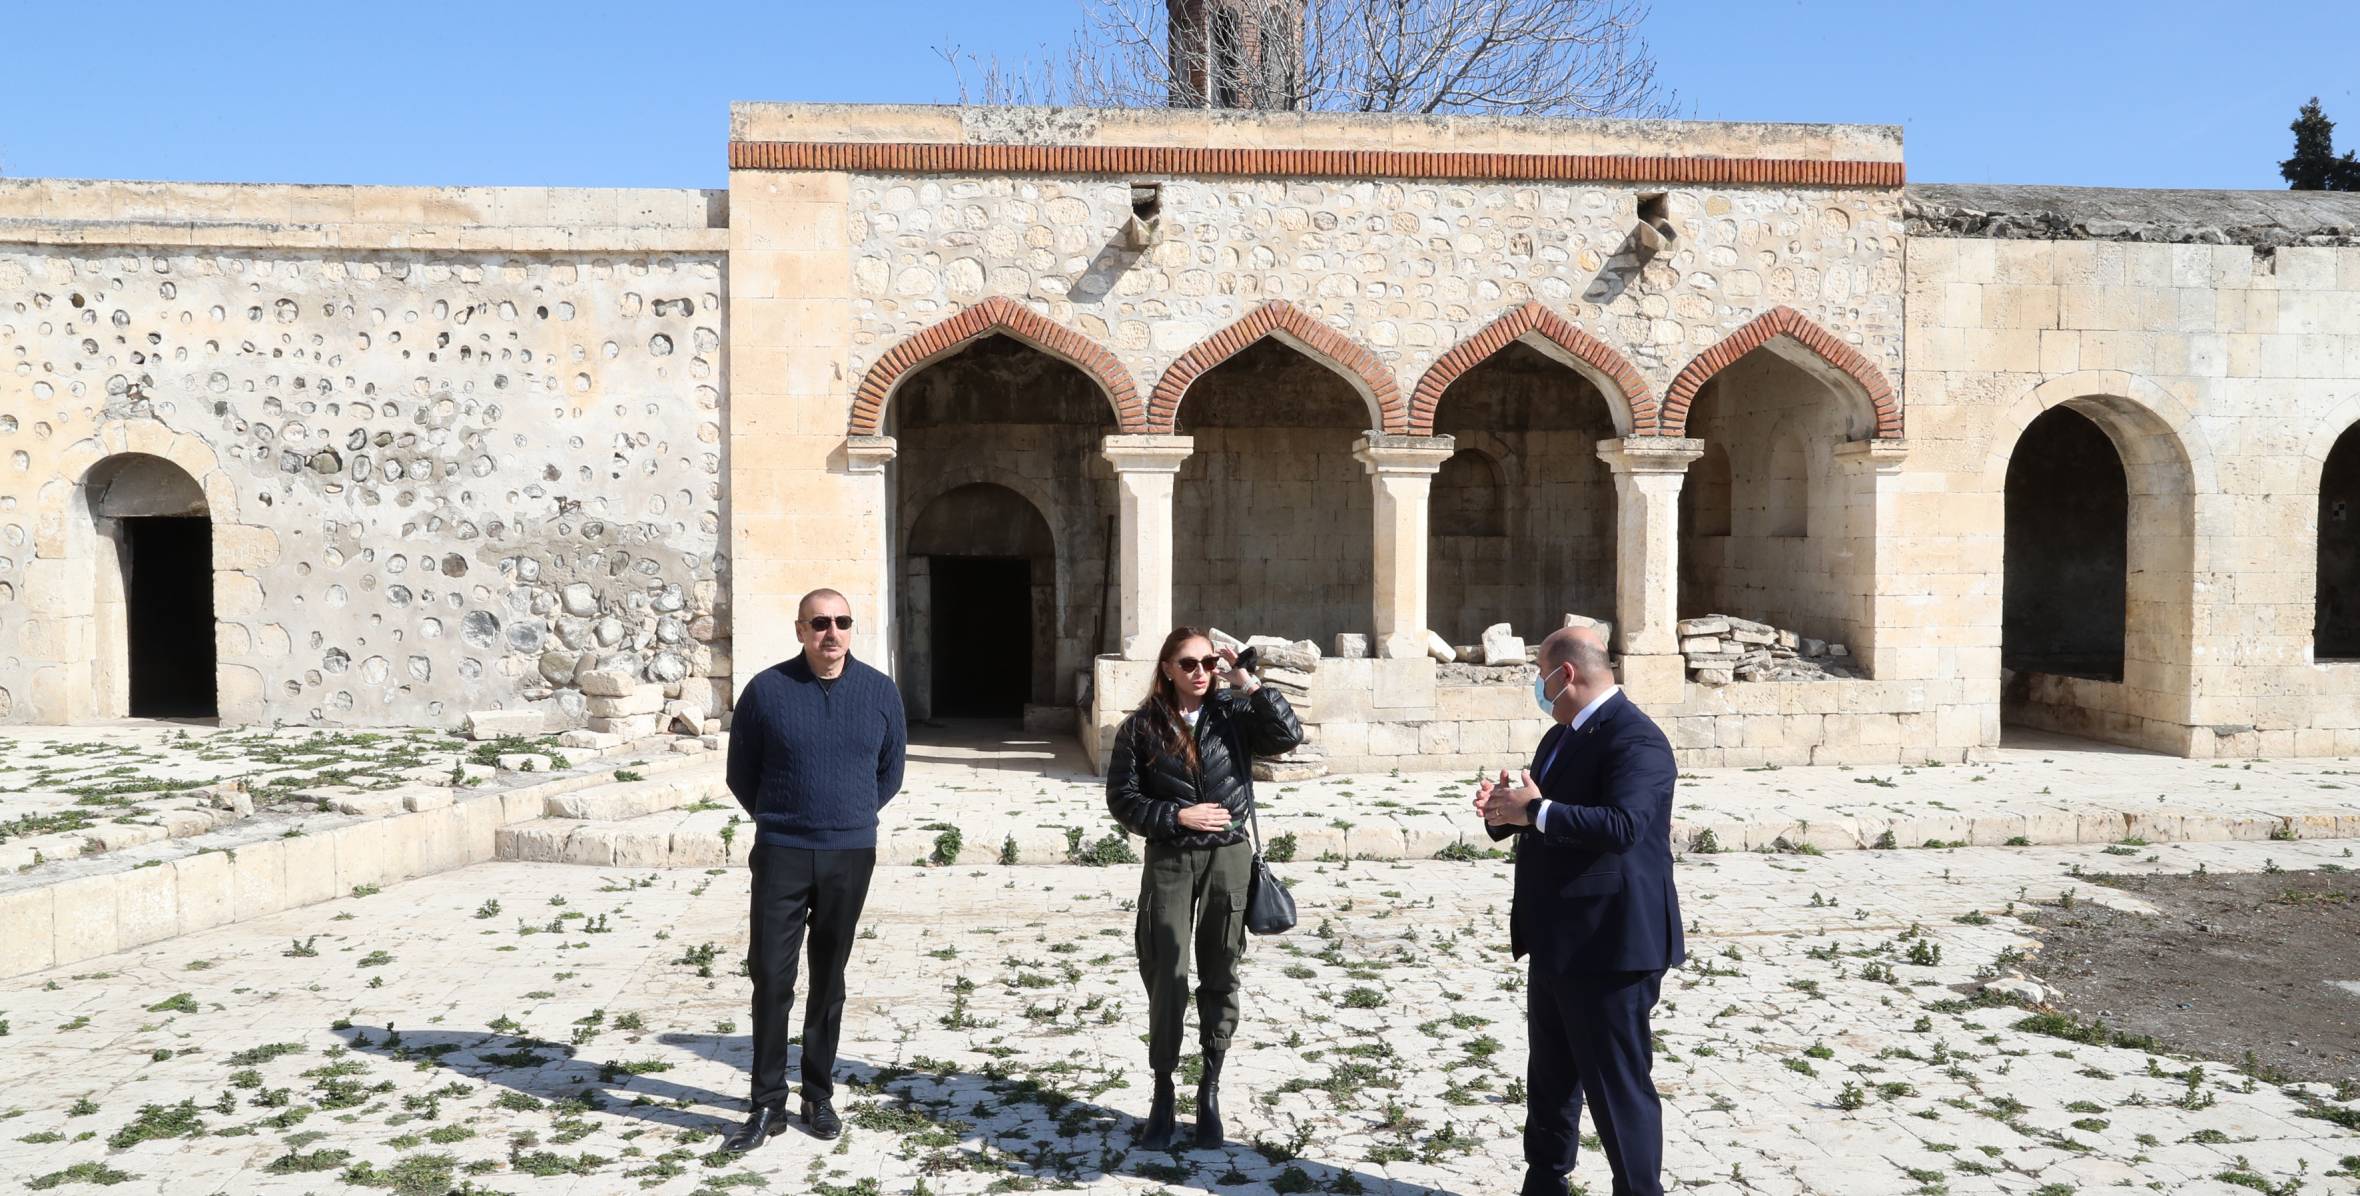 Ilham Aliyev and First Lady Mehriban Aliyeva visited tombs and house – Imaret complex of Karabakh khans in Aghdam